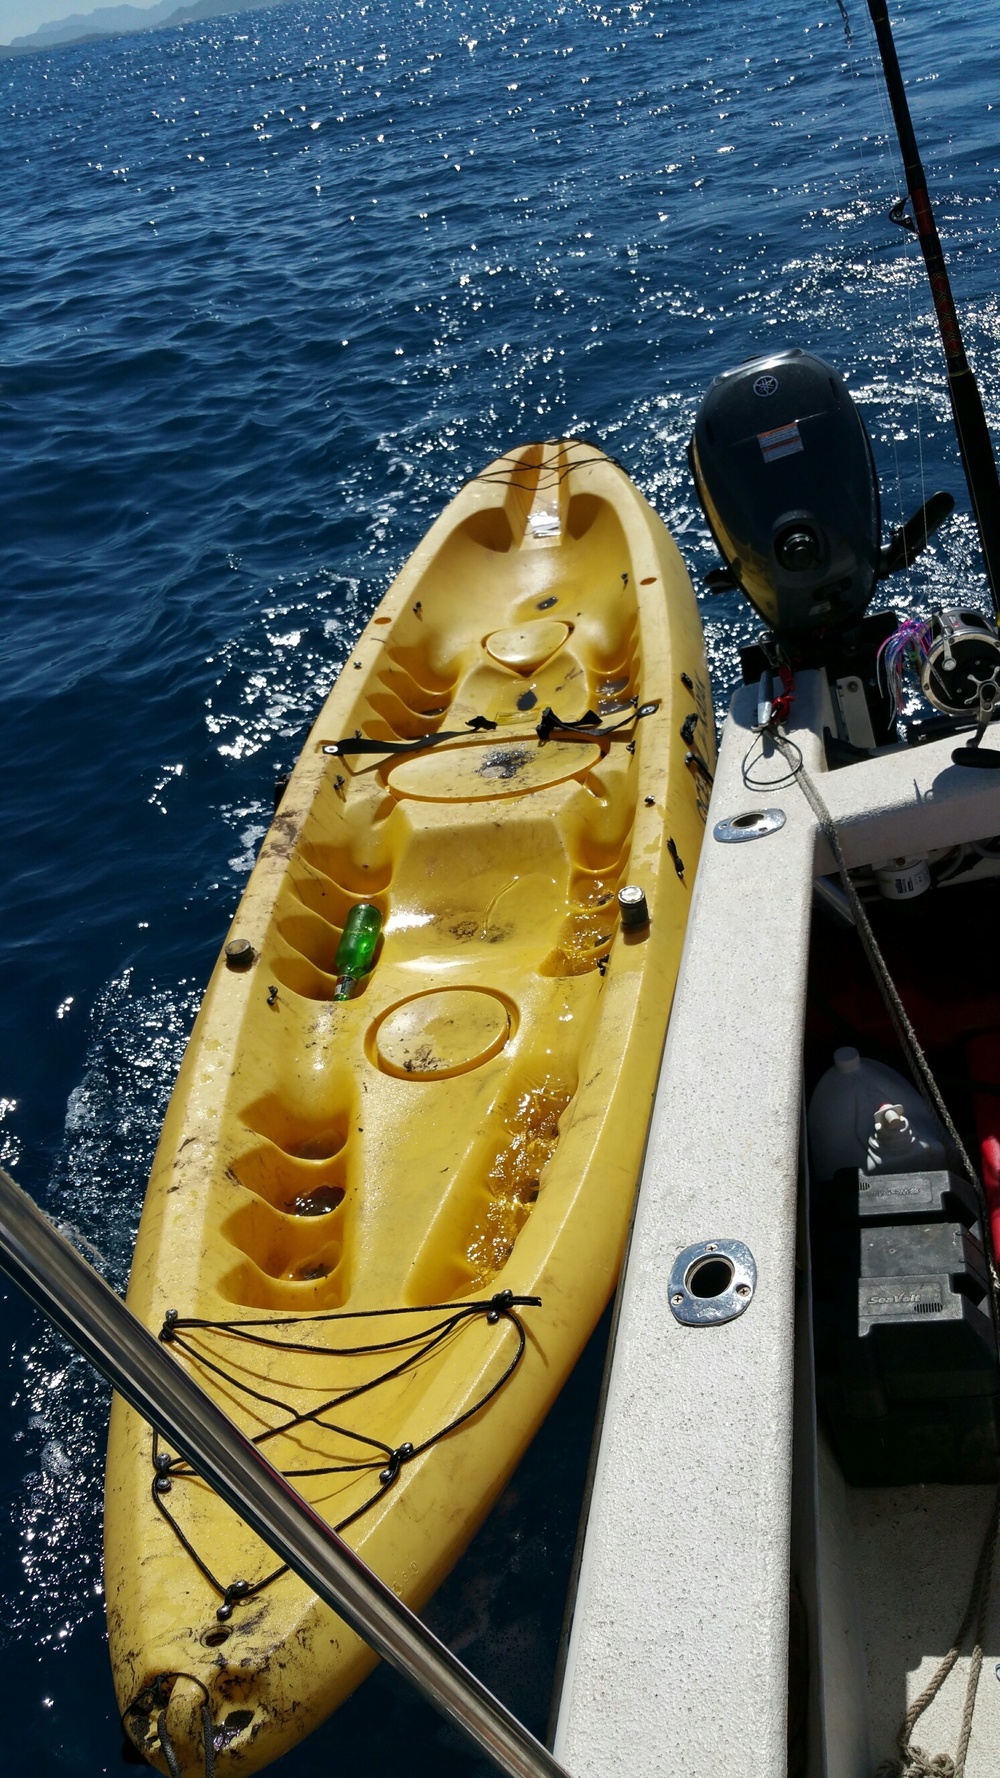 Imagery available: Coast Guard searching for owner of adrift yellow kayak near Kaneohe Bay, Oahu